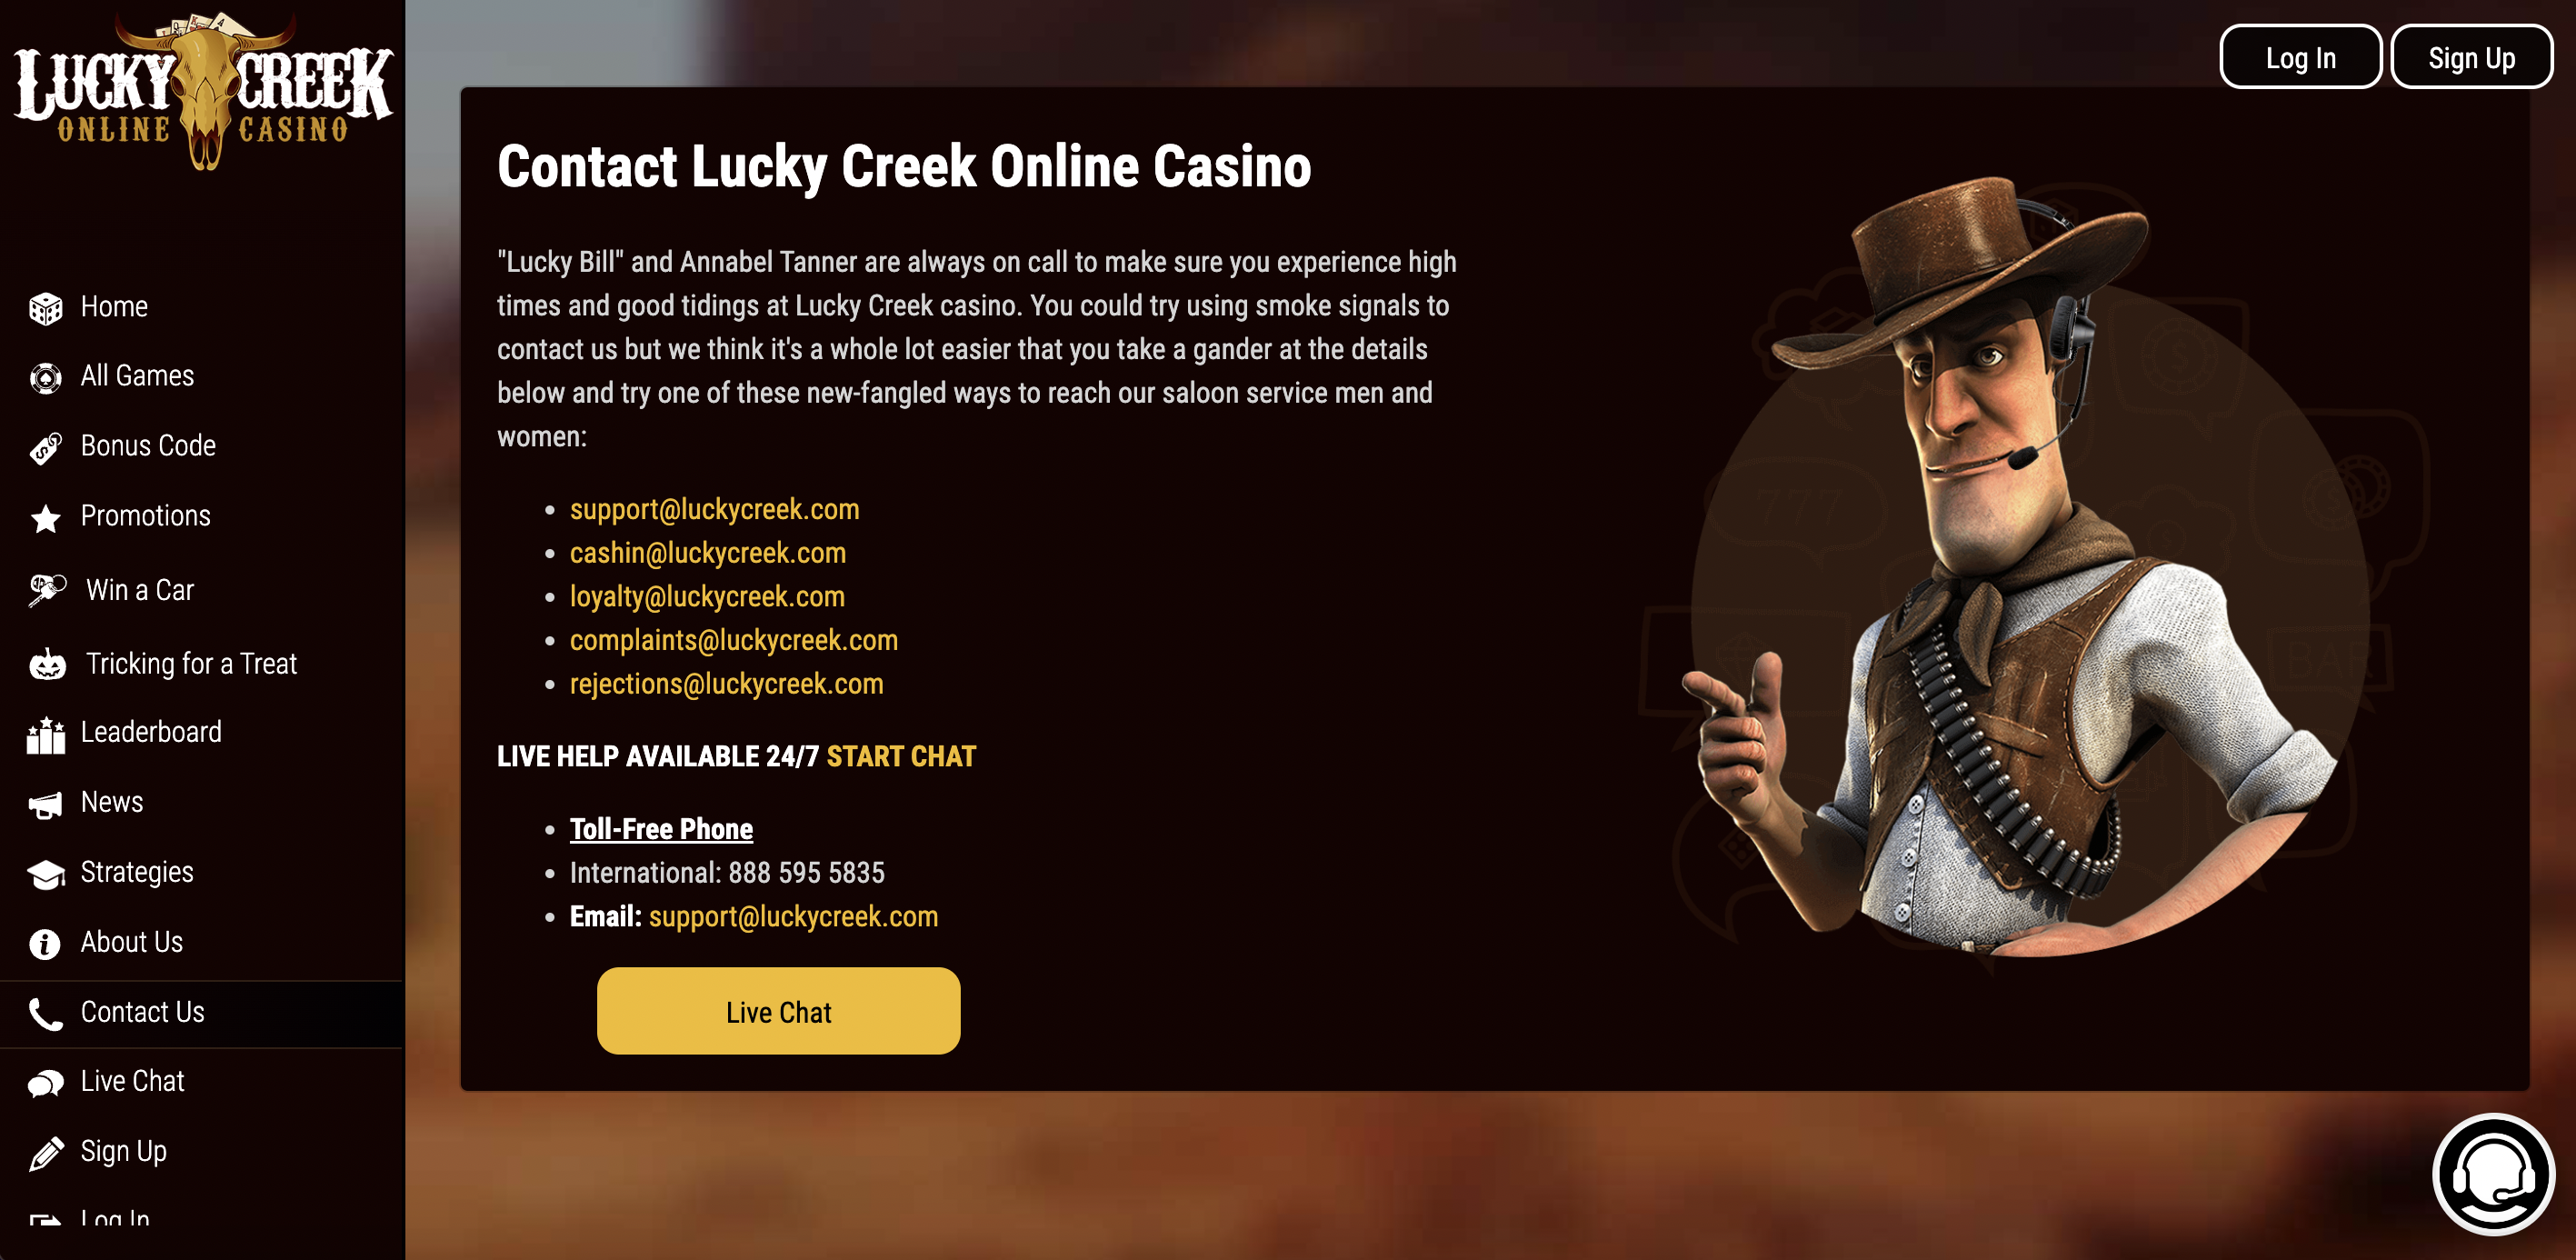 Lucky Creek Casino Contact Page Image 